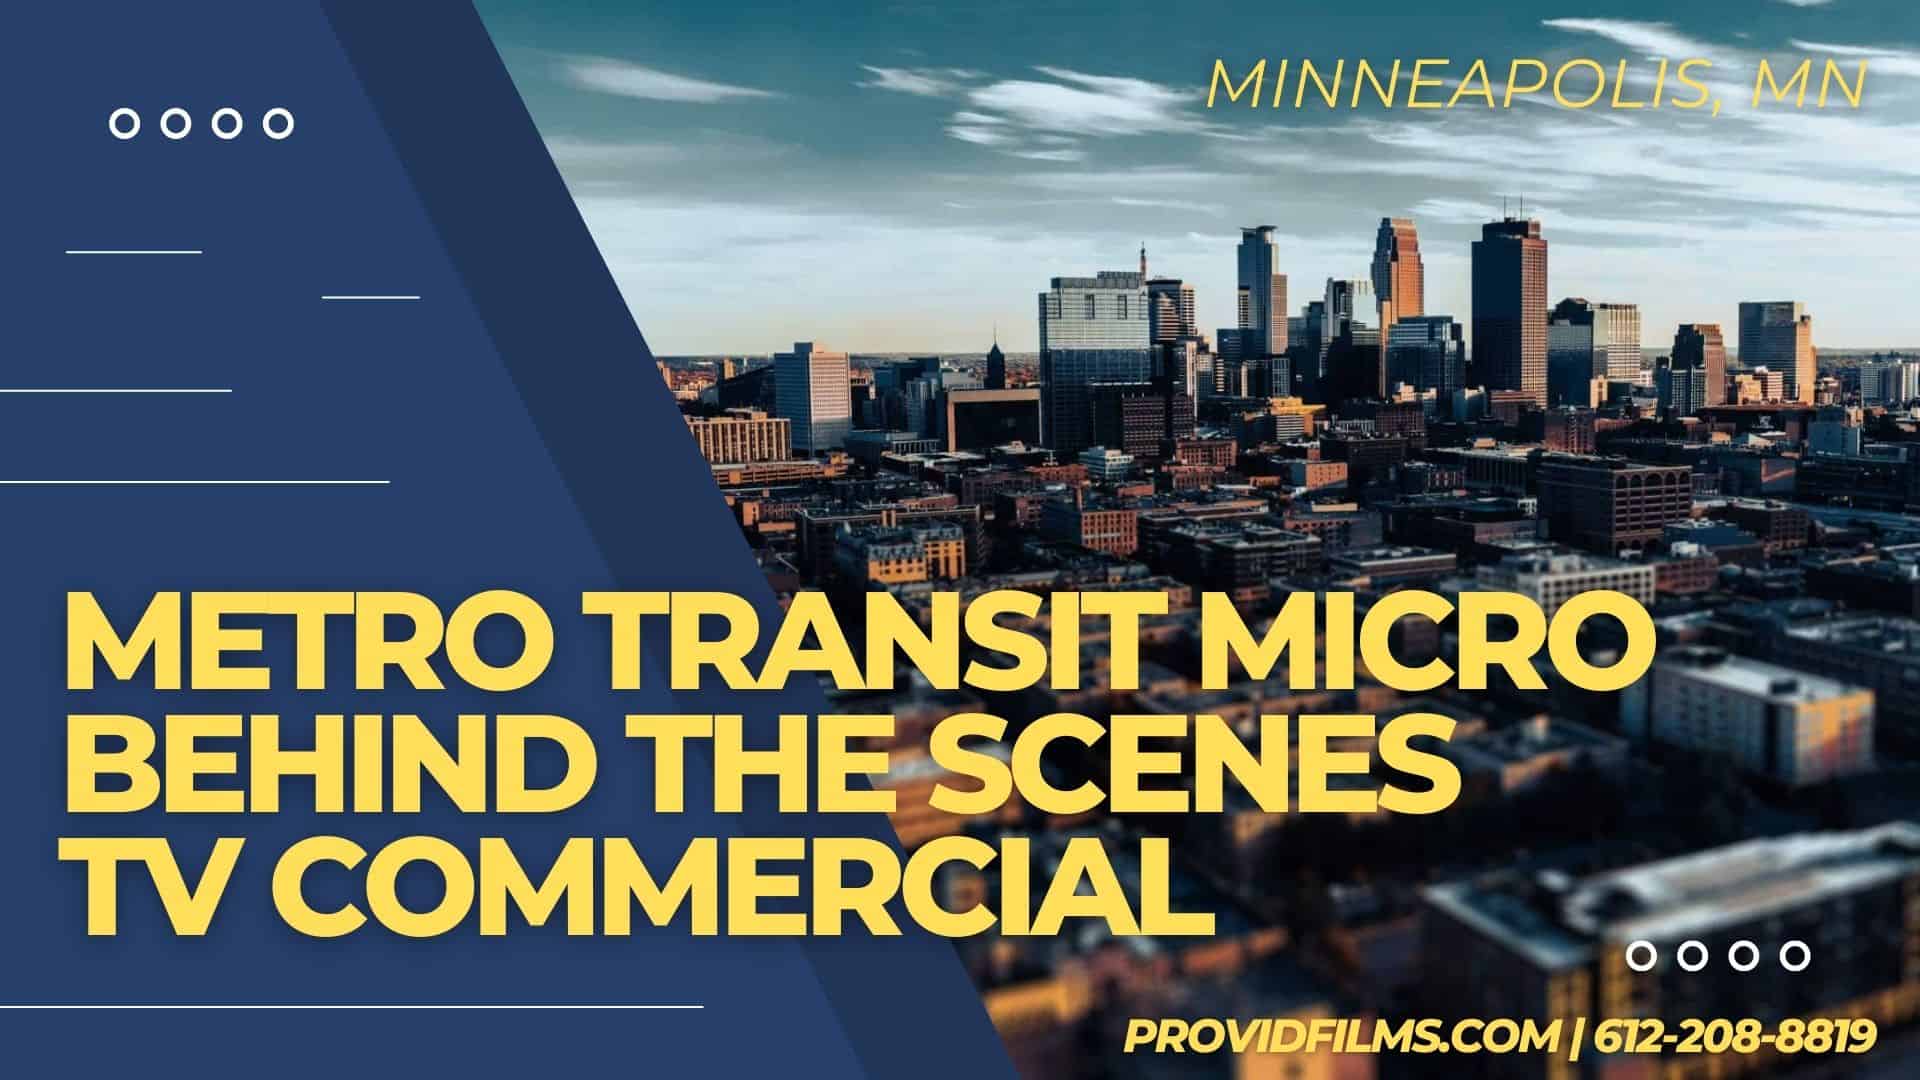 Graphic with skyline of Minneapolis Minnesota with the text on screen saying "Metro Transit Micro Mini Bus TV Commercial"